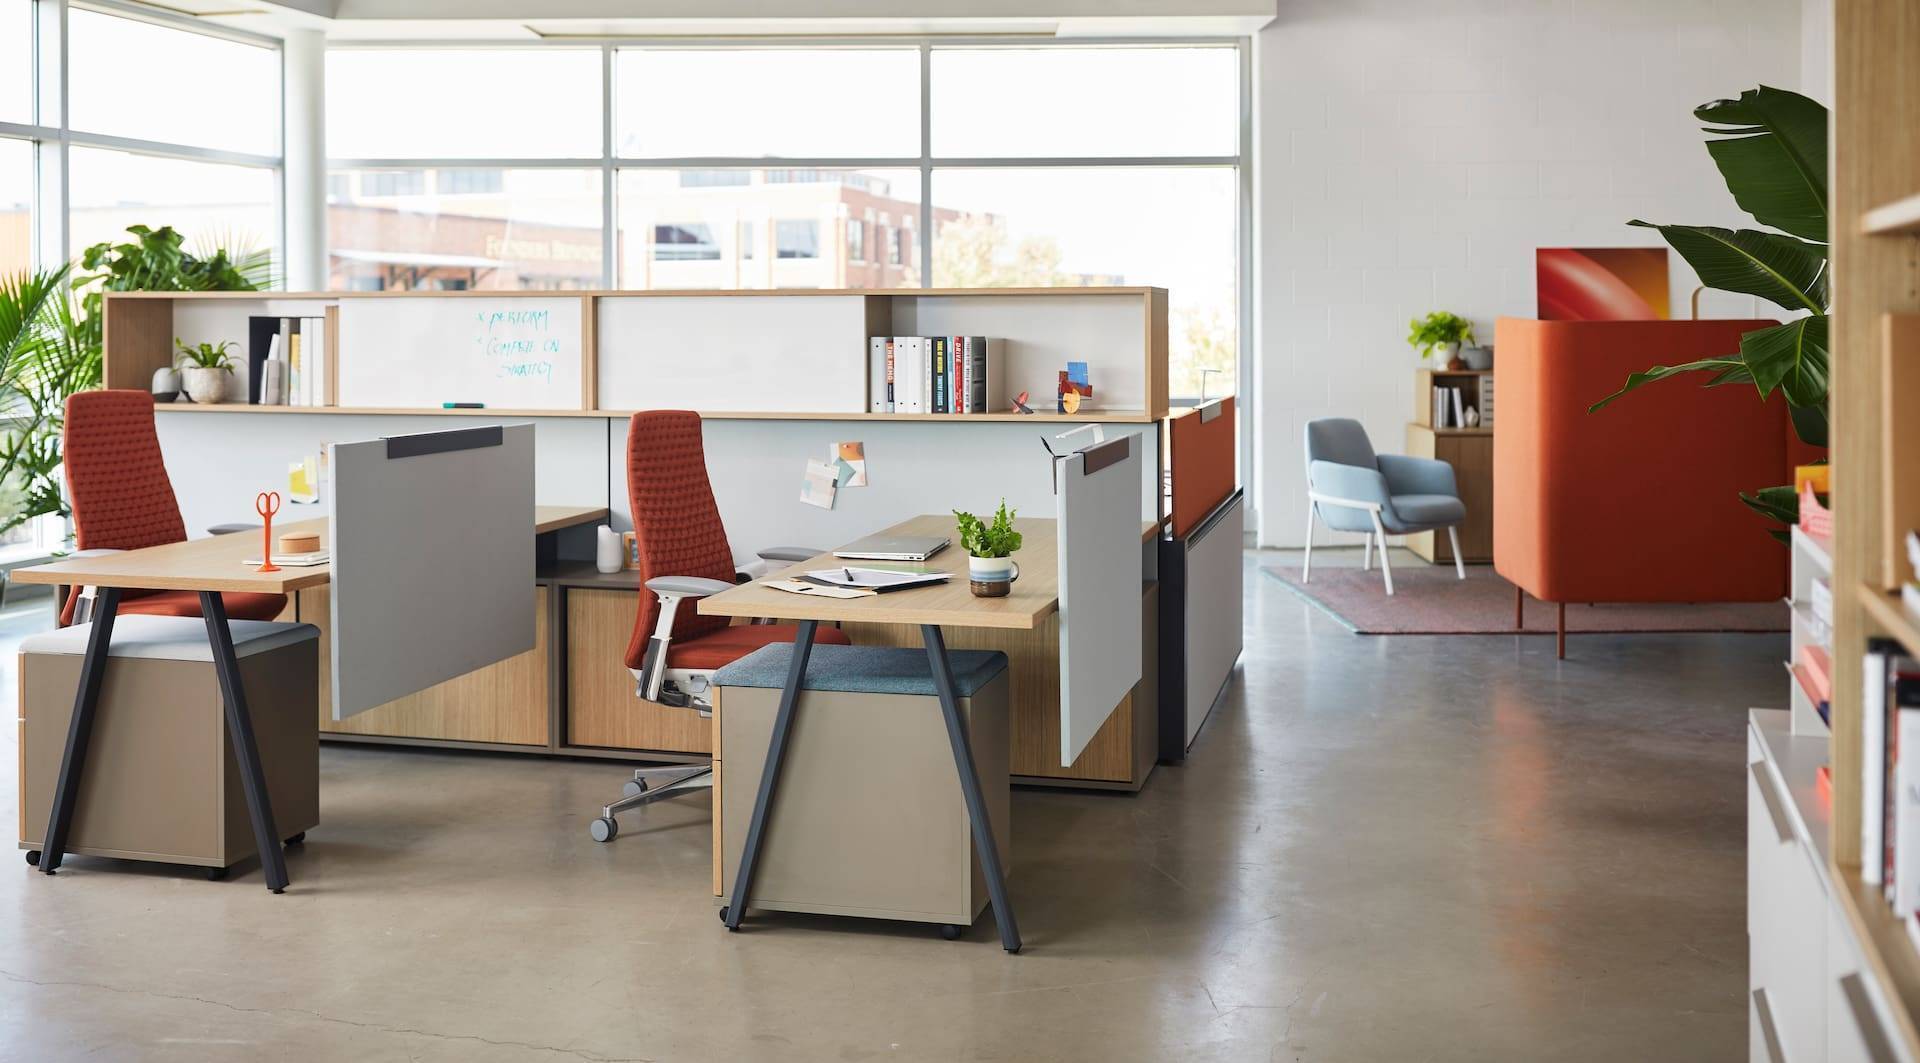 A modern workplace with desks and plants.